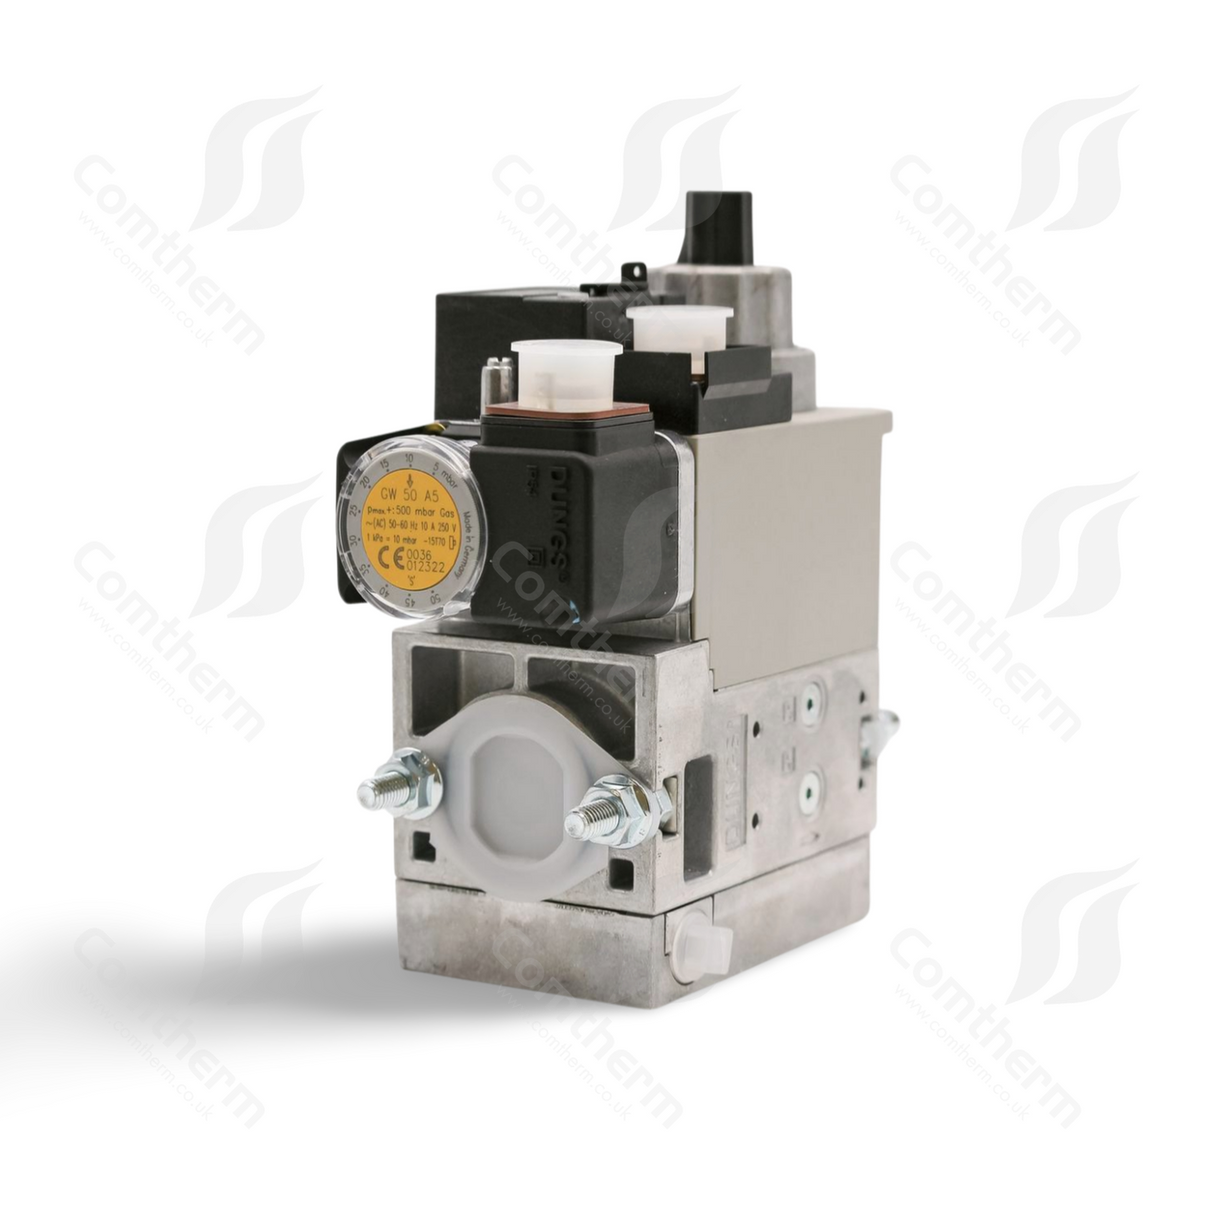 Dungs MB-DLE 407 B01 S52 + GW150A5 Multibloc Gas Valve - 230v